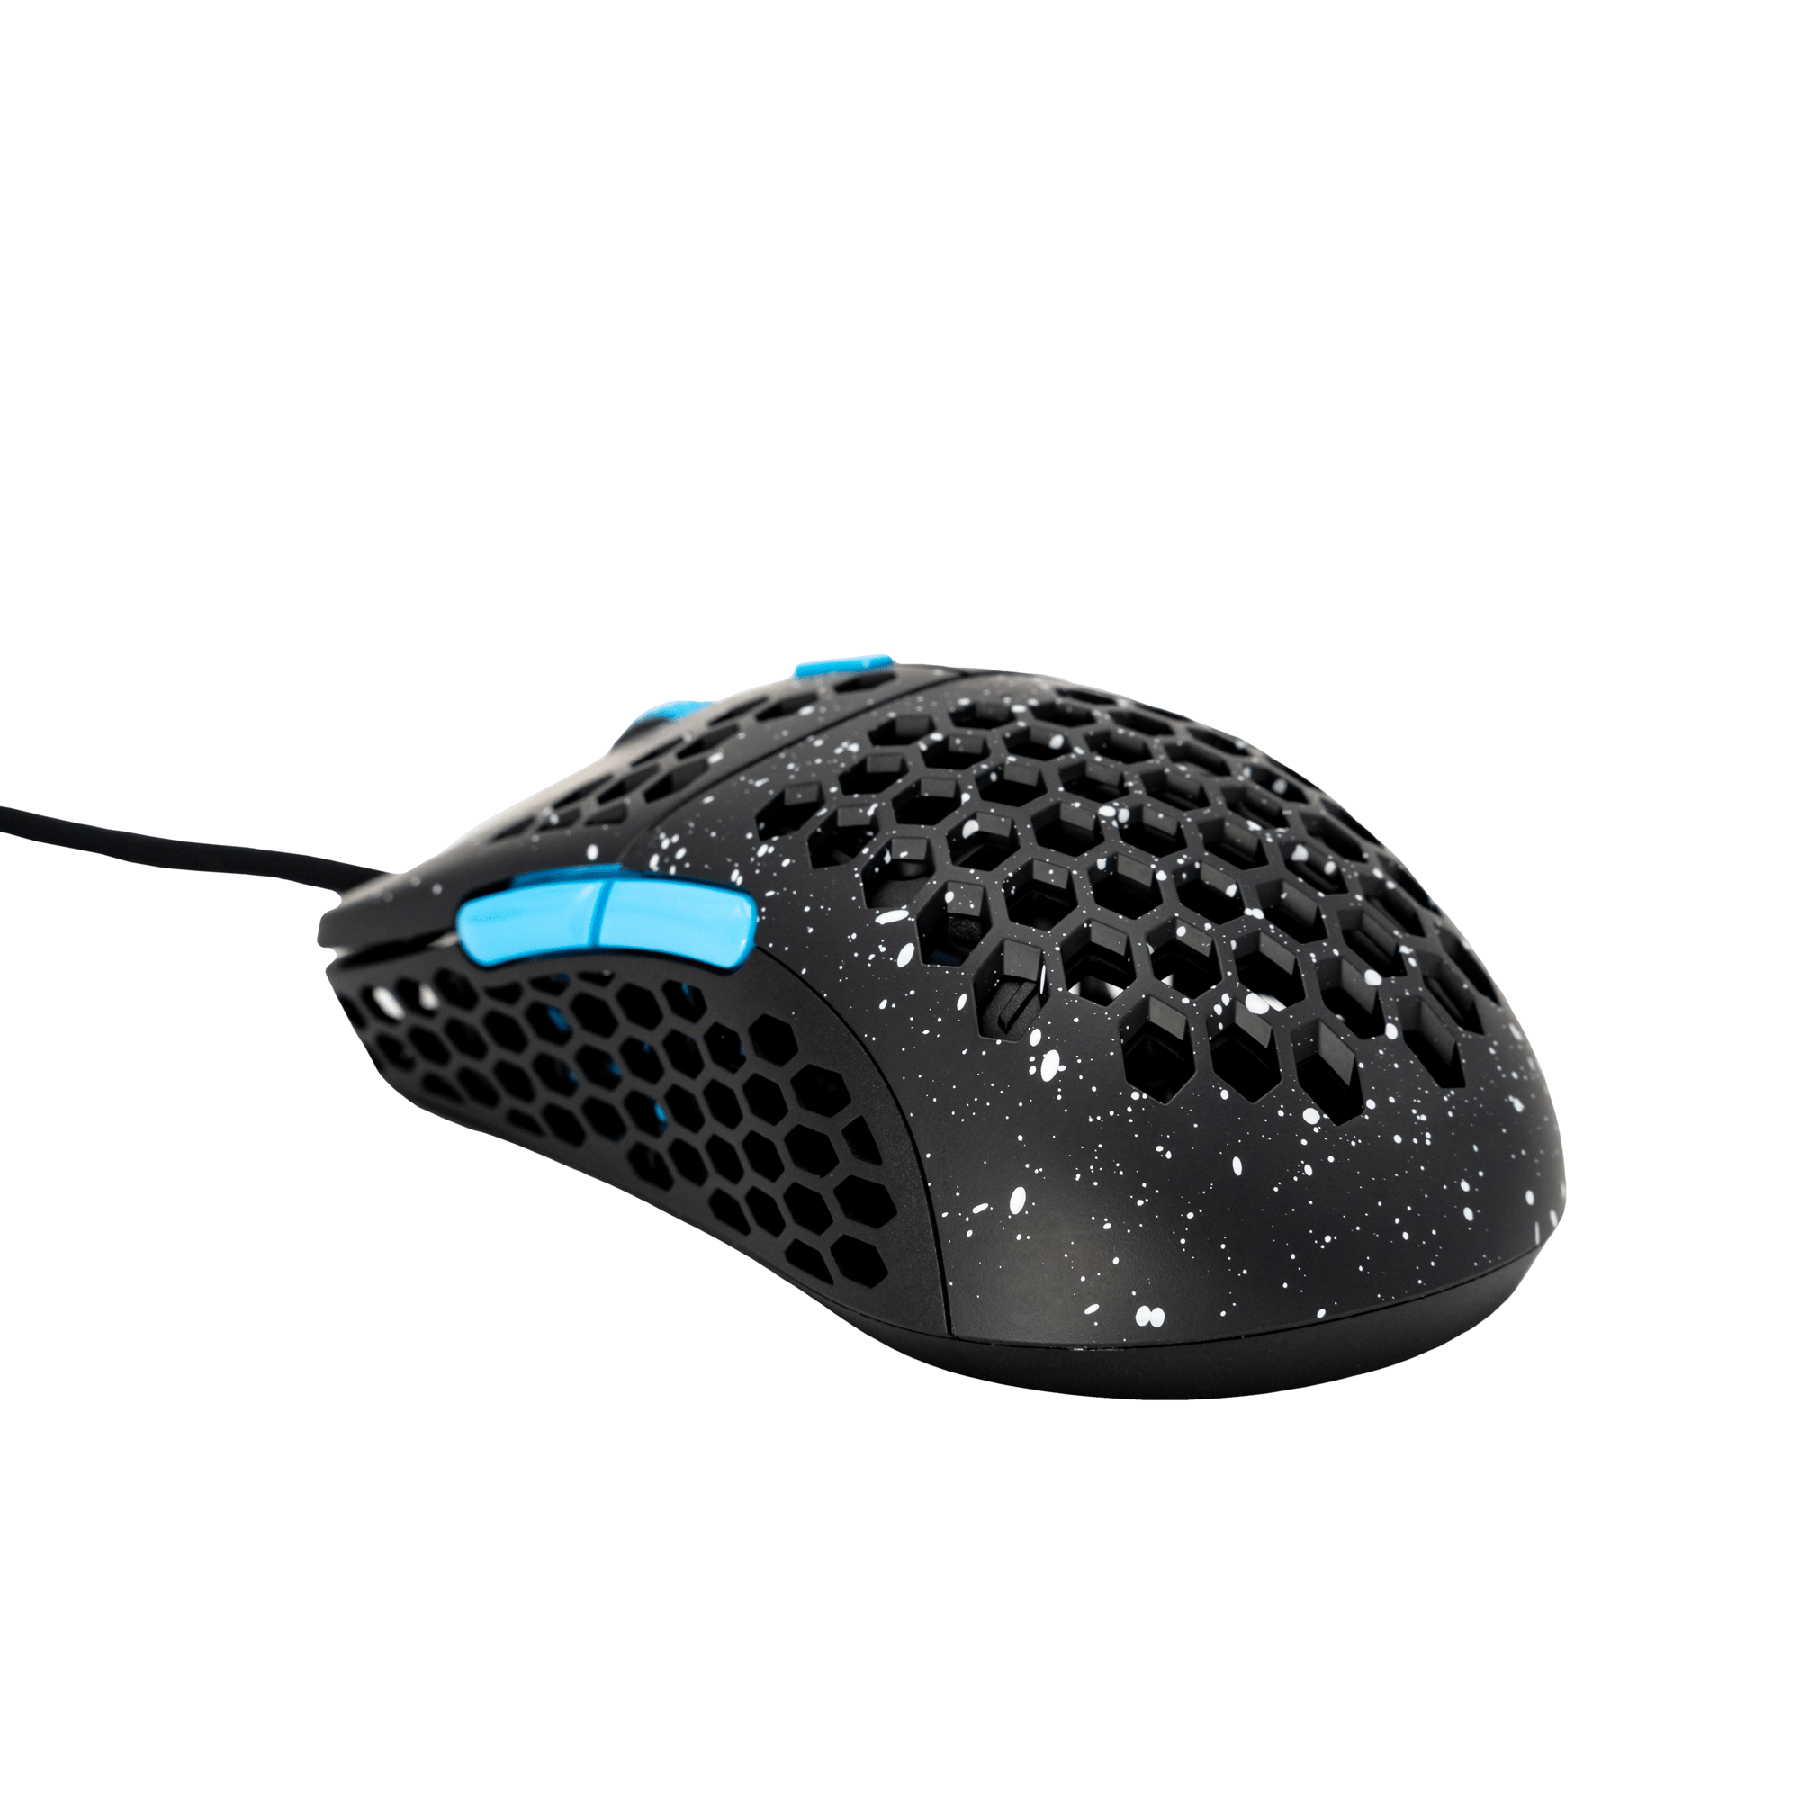 Hati-S HTS ACE Wired Gaming Mouse up to 16000 DPI - 3389 